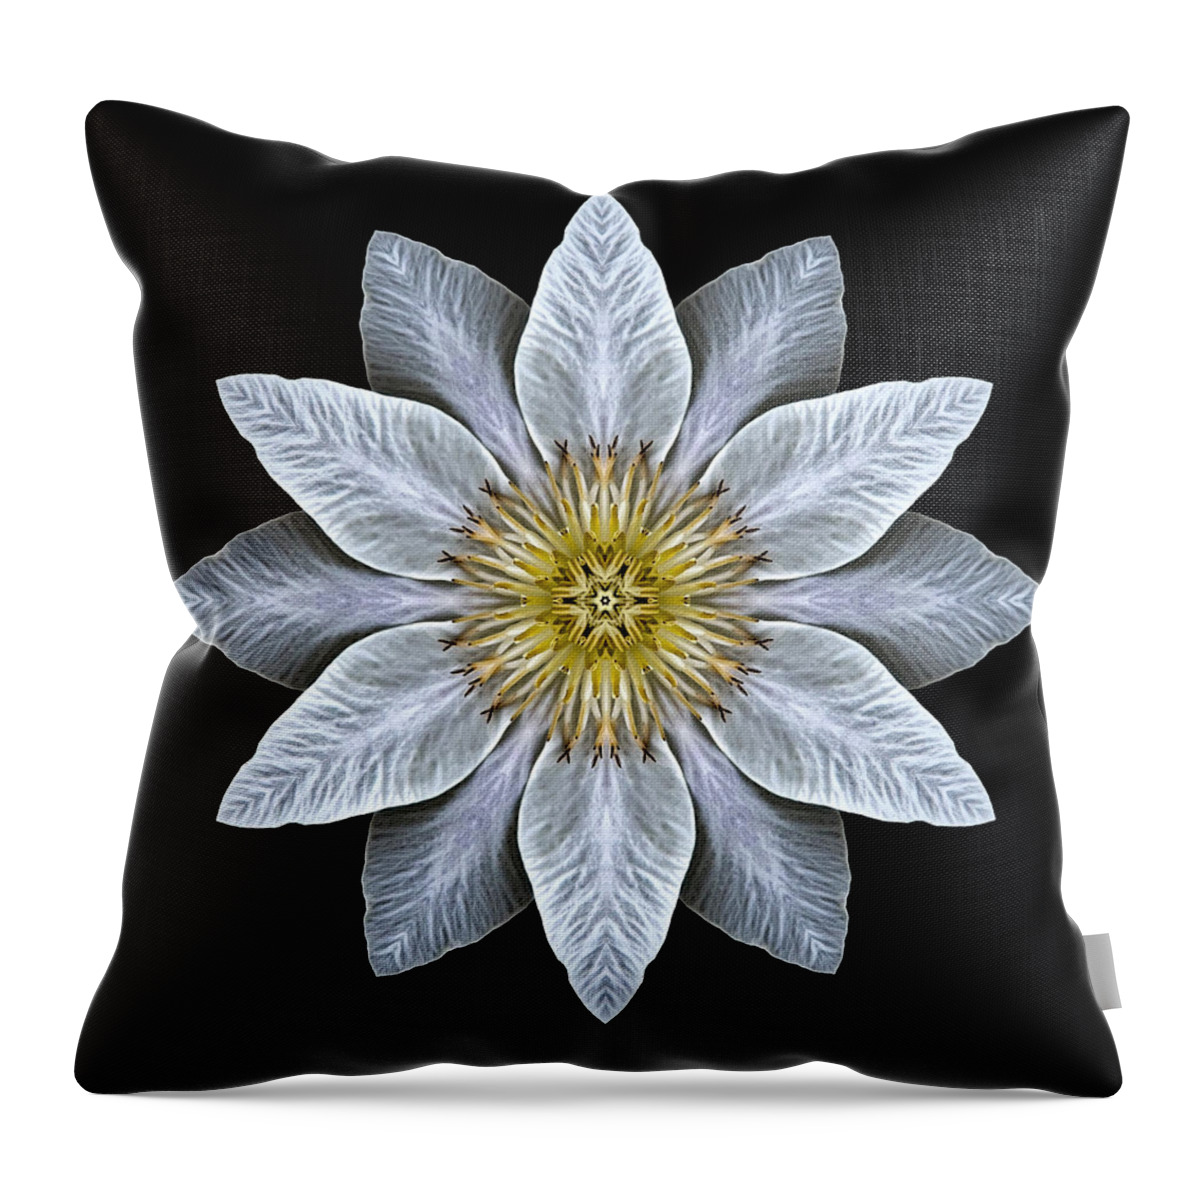 Flower Throw Pillow featuring the photograph White Clematis Flower Mandala by David J Bookbinder